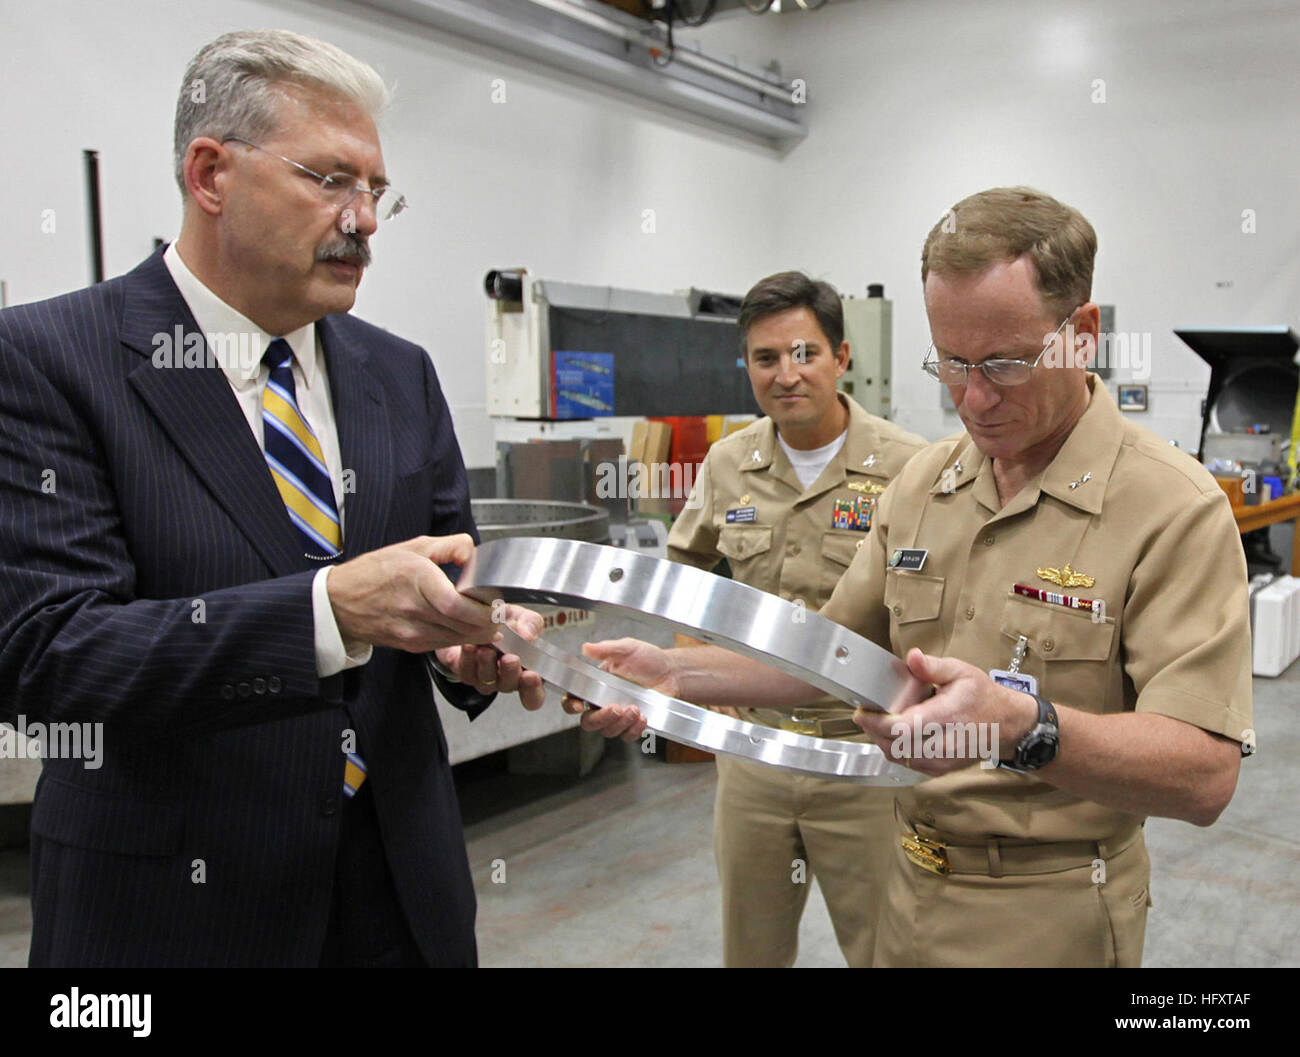 090929-N-8863V-015 NORCO, Calif. (Sept 29, 2009) Dr. William Luebke, technical director of Naval Surface Warfare Center, Corona, left, shows a prototype interface gage to Rear Adm. Kevin Quinn, commander, Naval Surface Force Atlantic, as Capt. Jay Kadowaki, commanding officer of Naval Surface Warfare Center Corona, looks on during a tour of the Measurement Science & Technology Laboratory at Naval Surface Warfare Center Corona. Quinn visited Naval Surface Warfare Center to gain a greater understanding of its capabilities to leverage talents and improve surface force readiness. (U.S. Navy Photo  Stock Photo